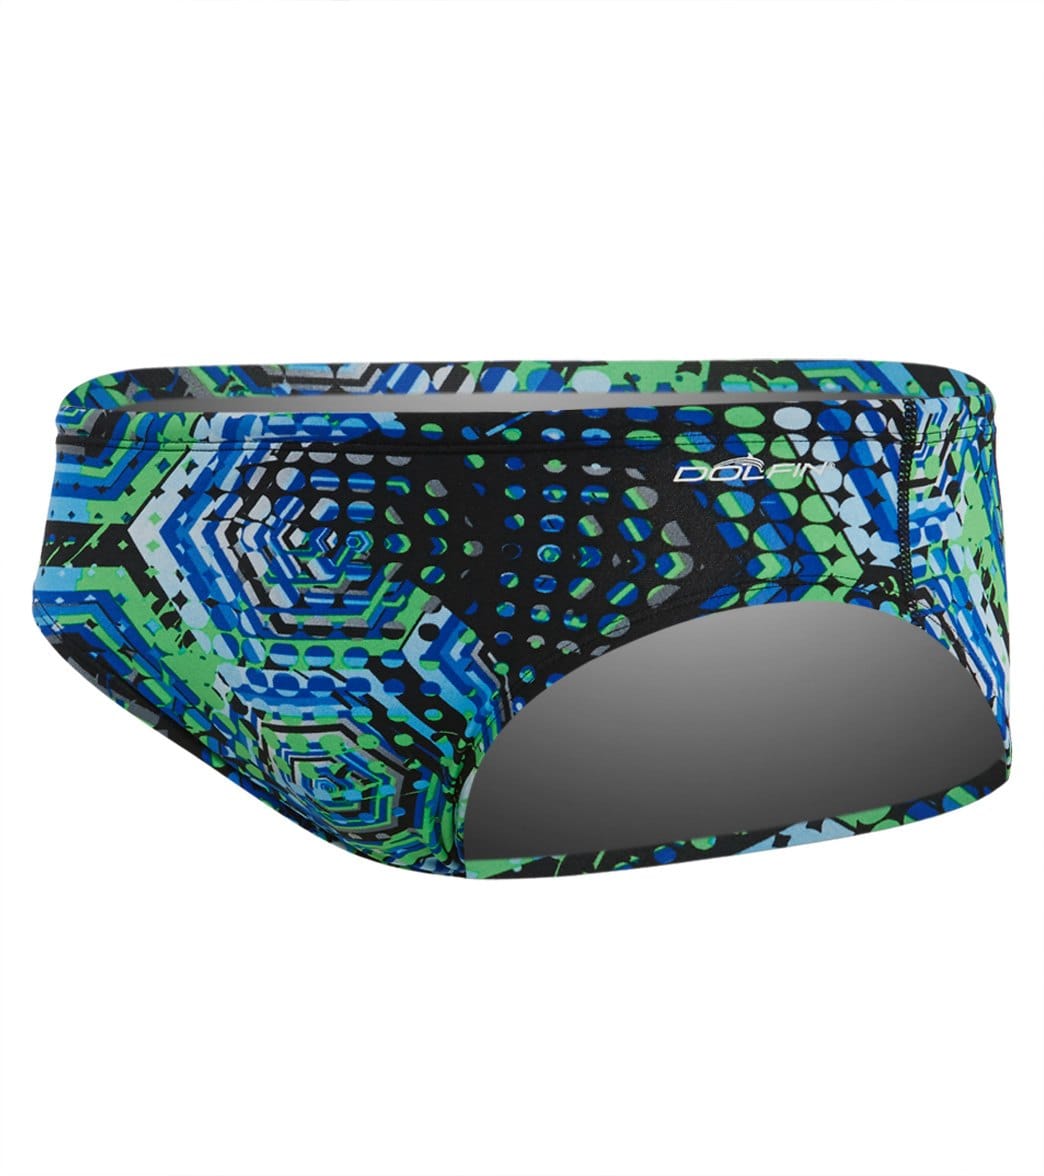 Dolfin Reliance Men's Hive All Over Racer Brief Swimsuit - Blue/Green 24 Polyester - Swimoutlet.com